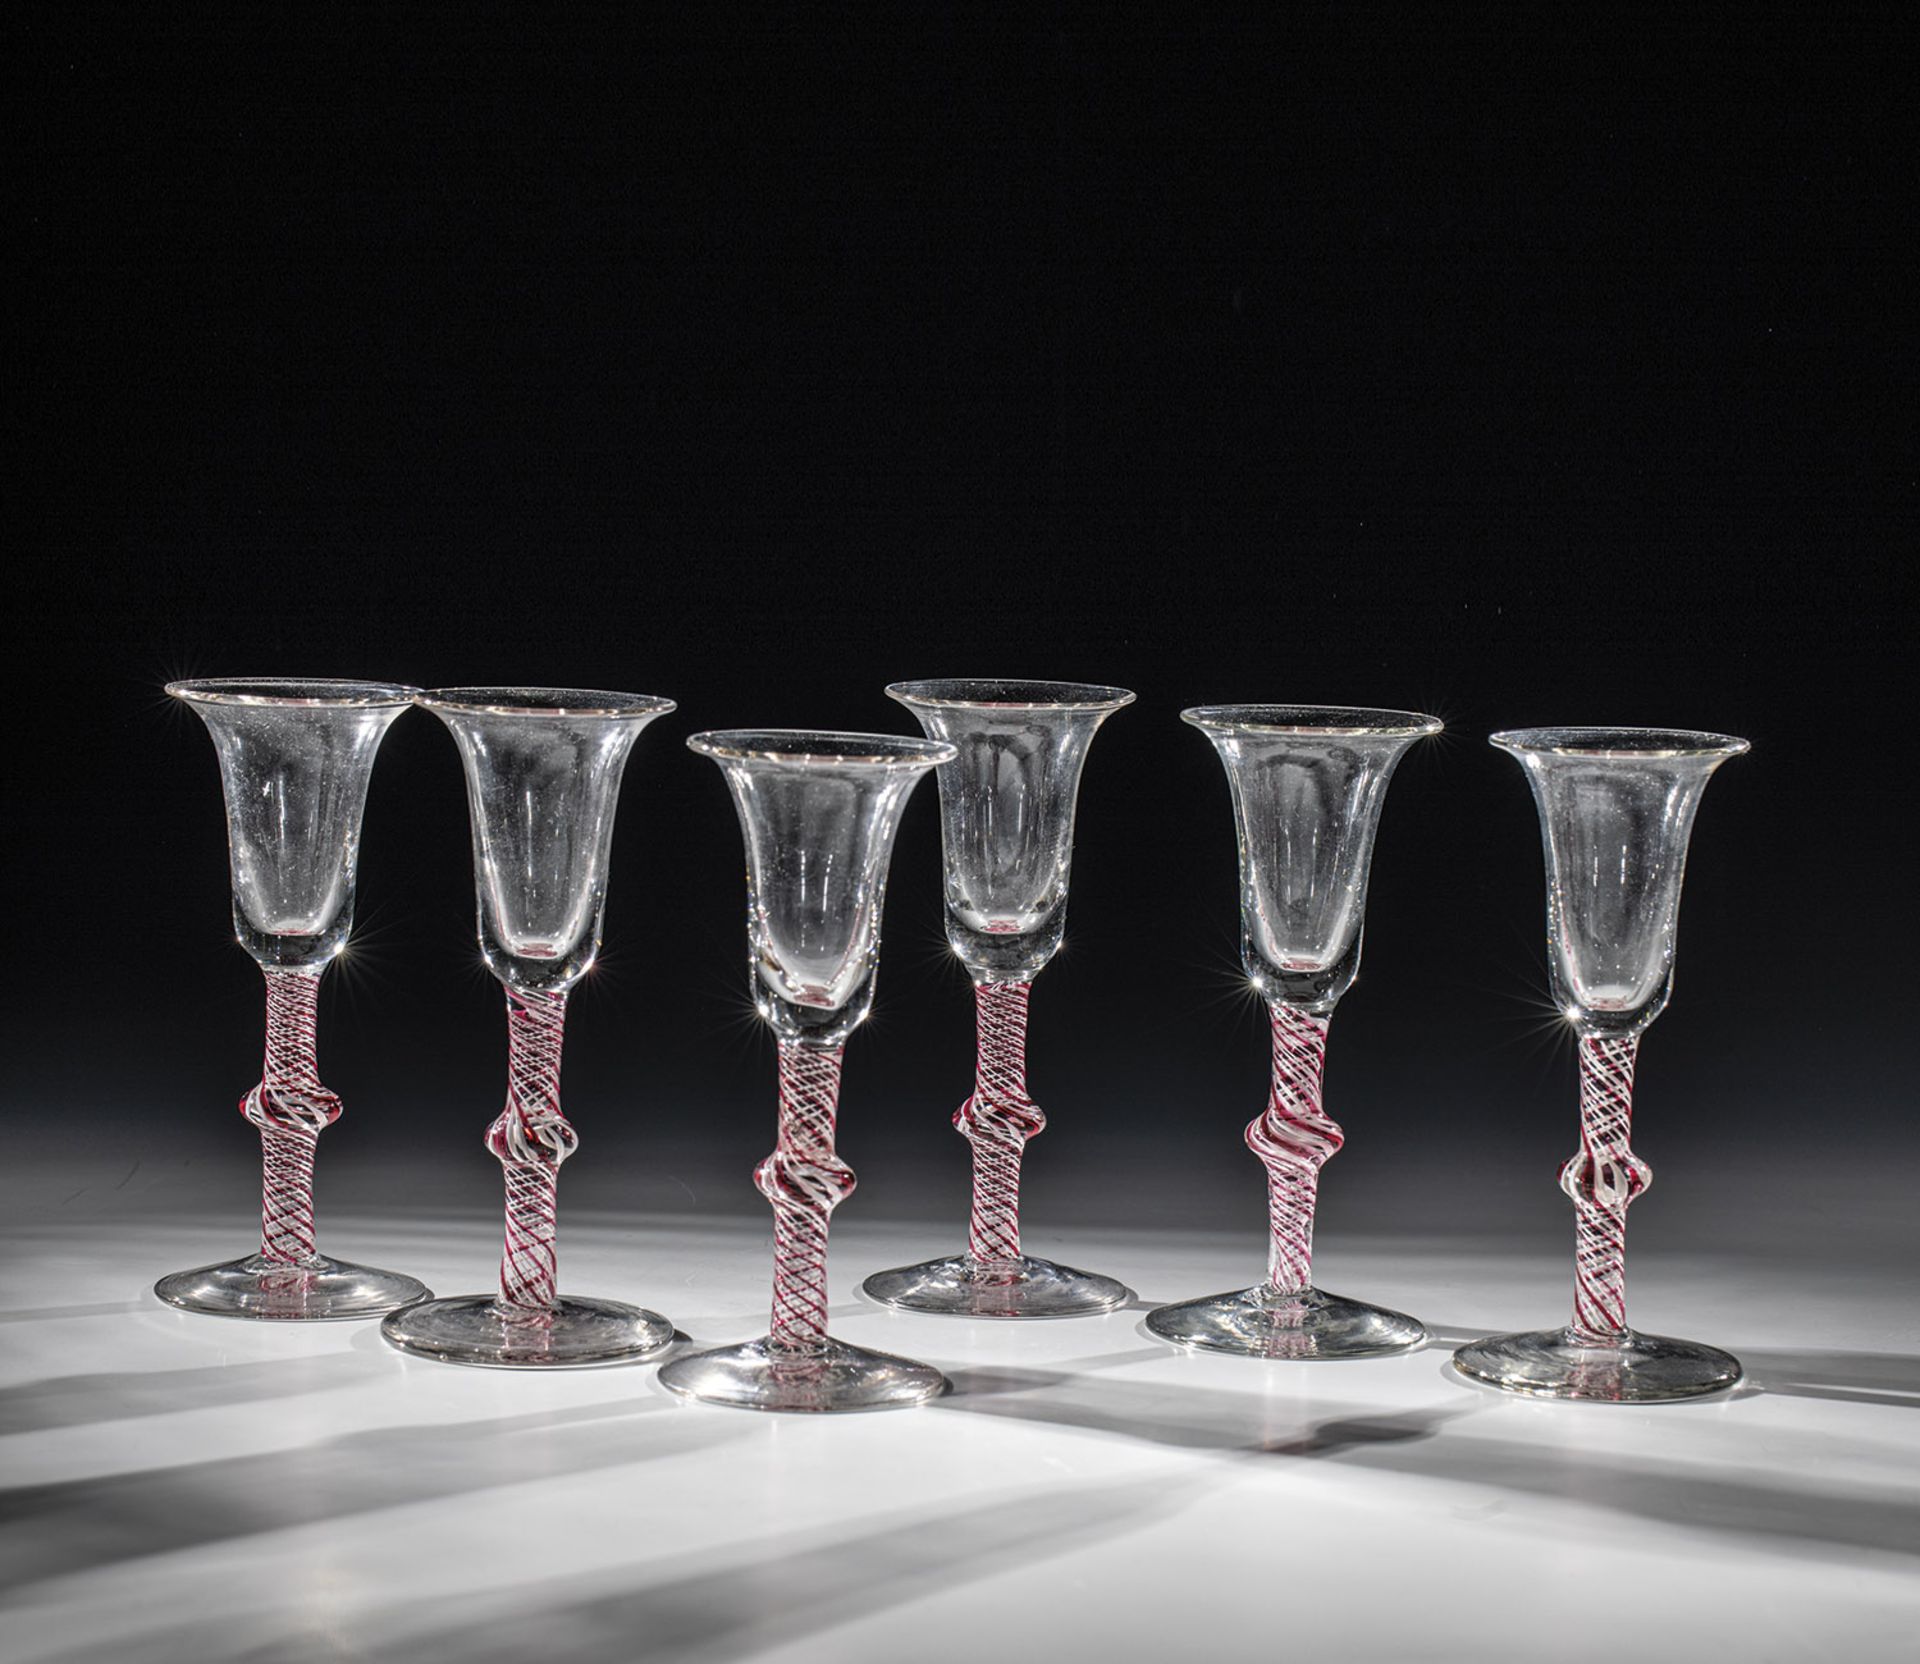 Set of six thread glasses LiÃ¨ge, 17th century. Shaft with nodes as well as spirally incorporated